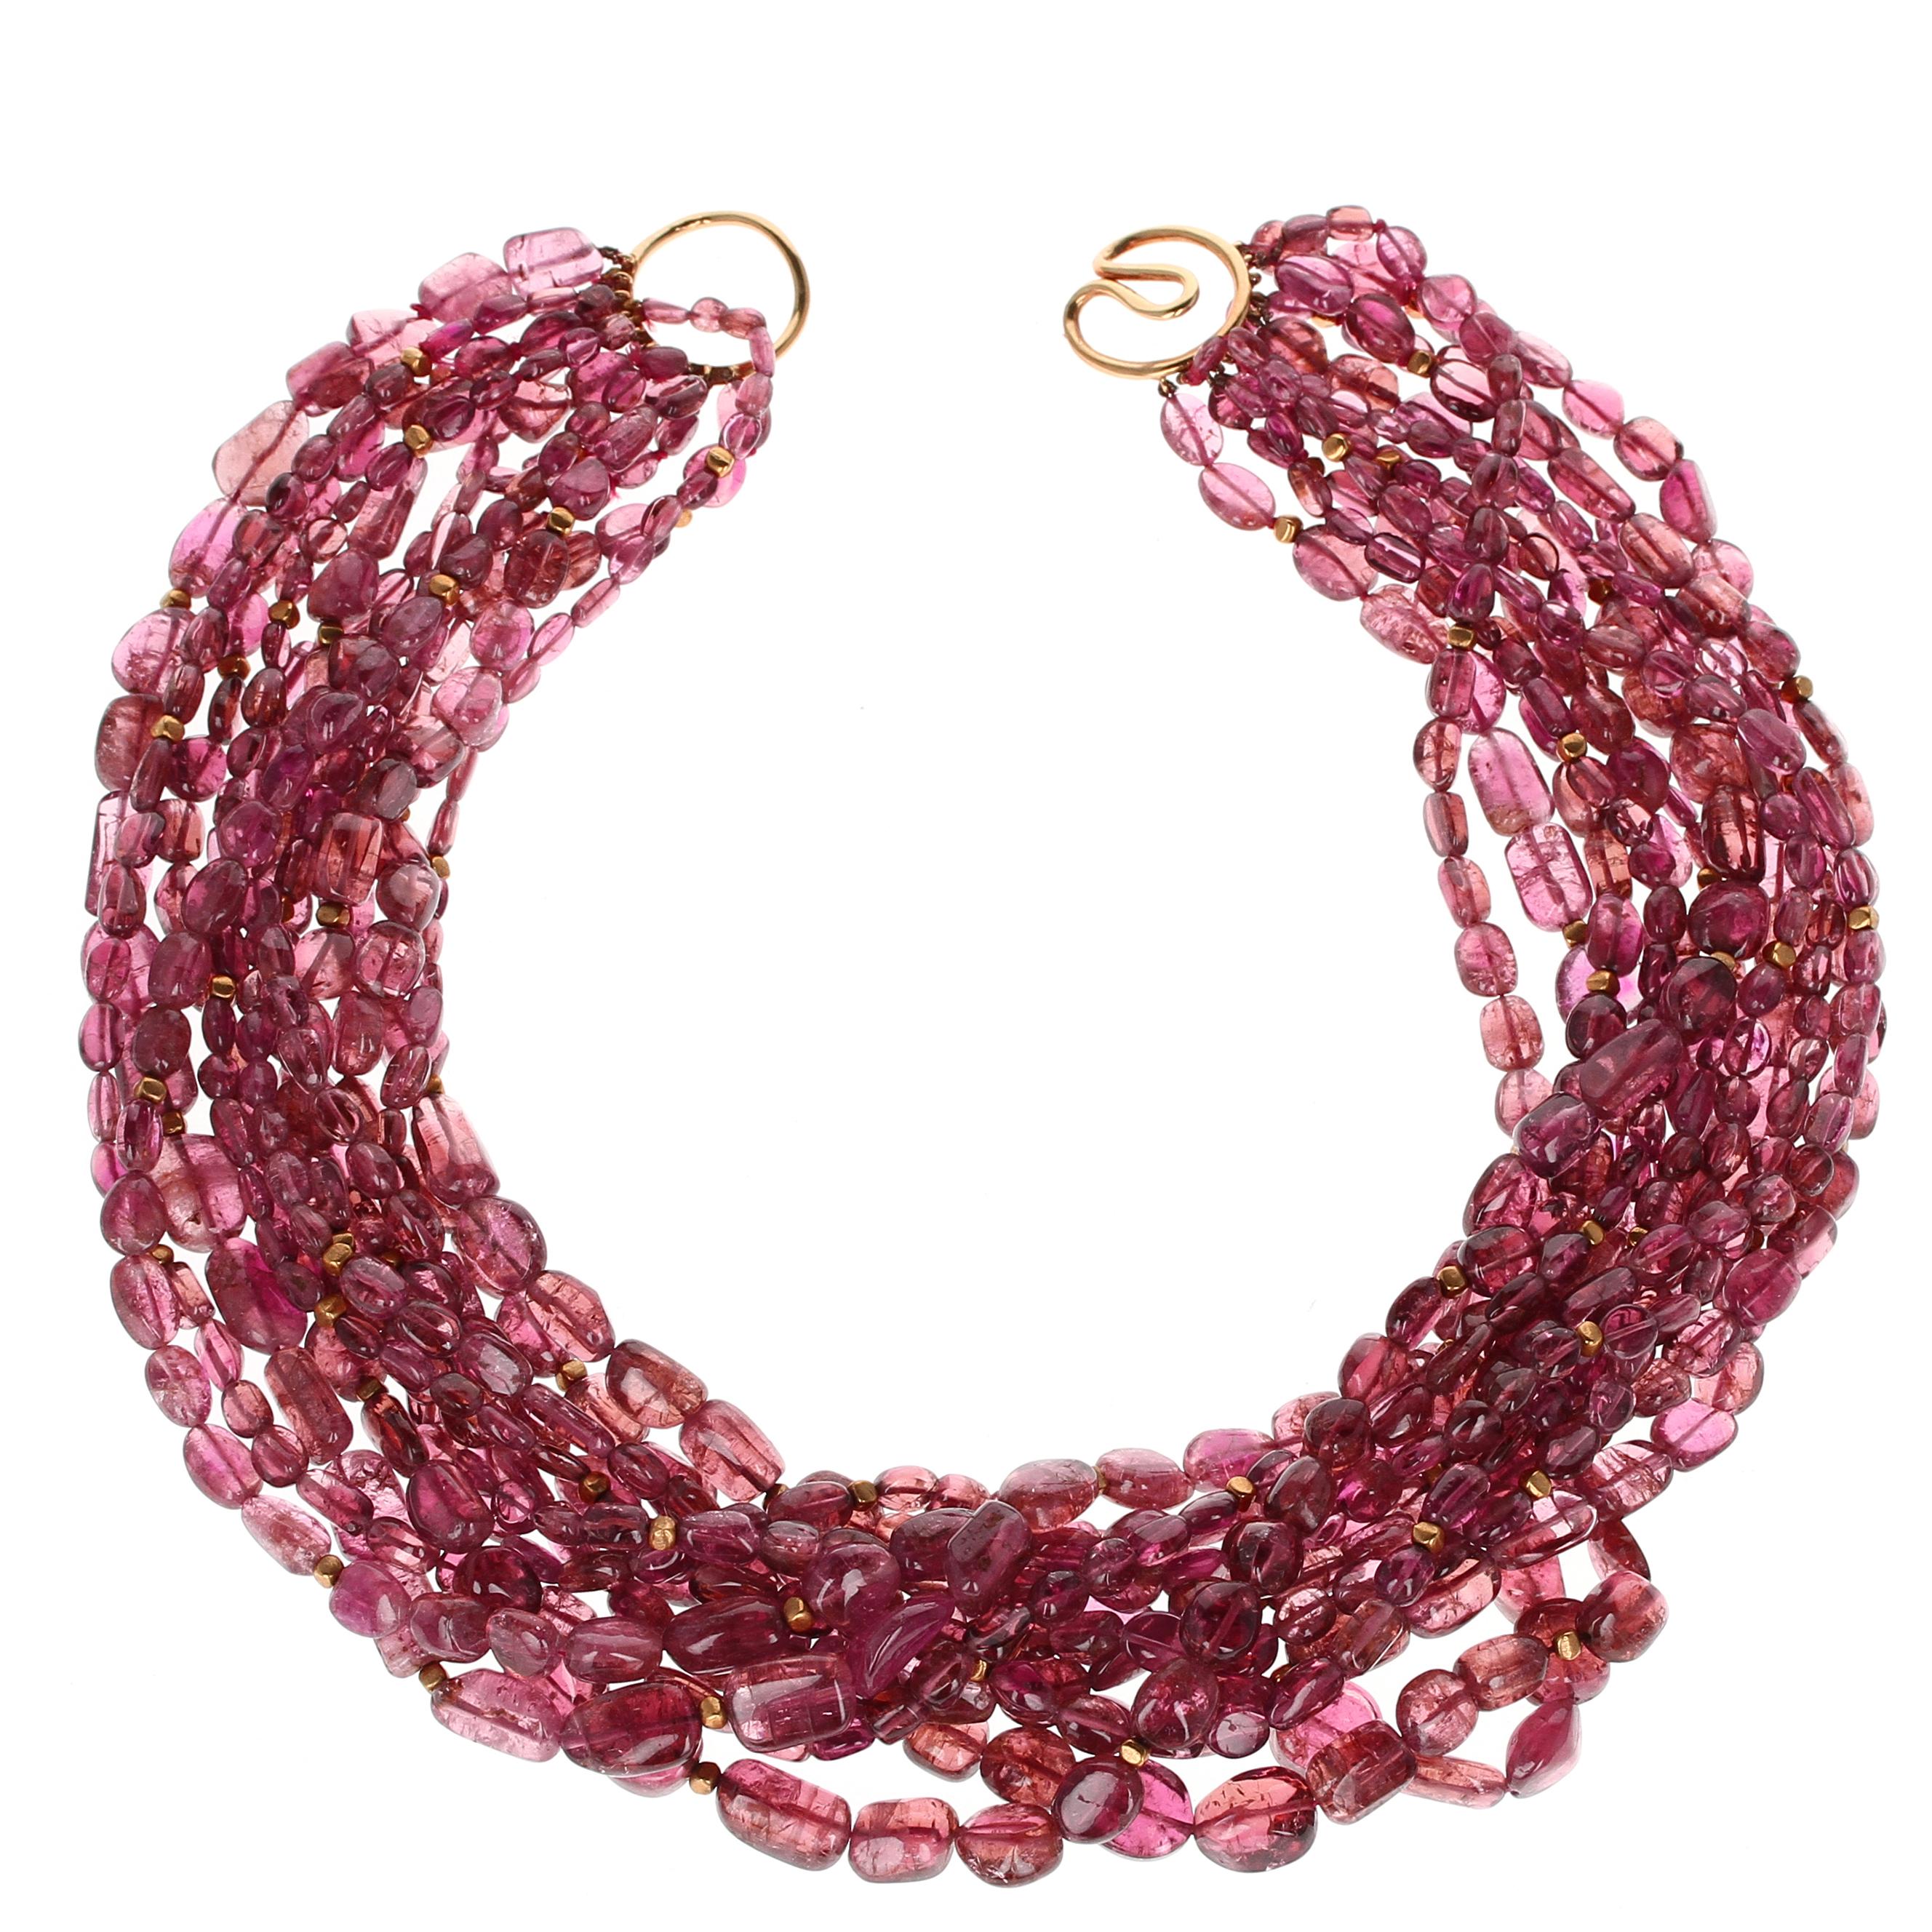 A simple and classic tourmaline bead necklace set with an 18kt yellow gold clasp; the total weight of the necklace is approximately 1,200 carats, the length is 17.5 inches.